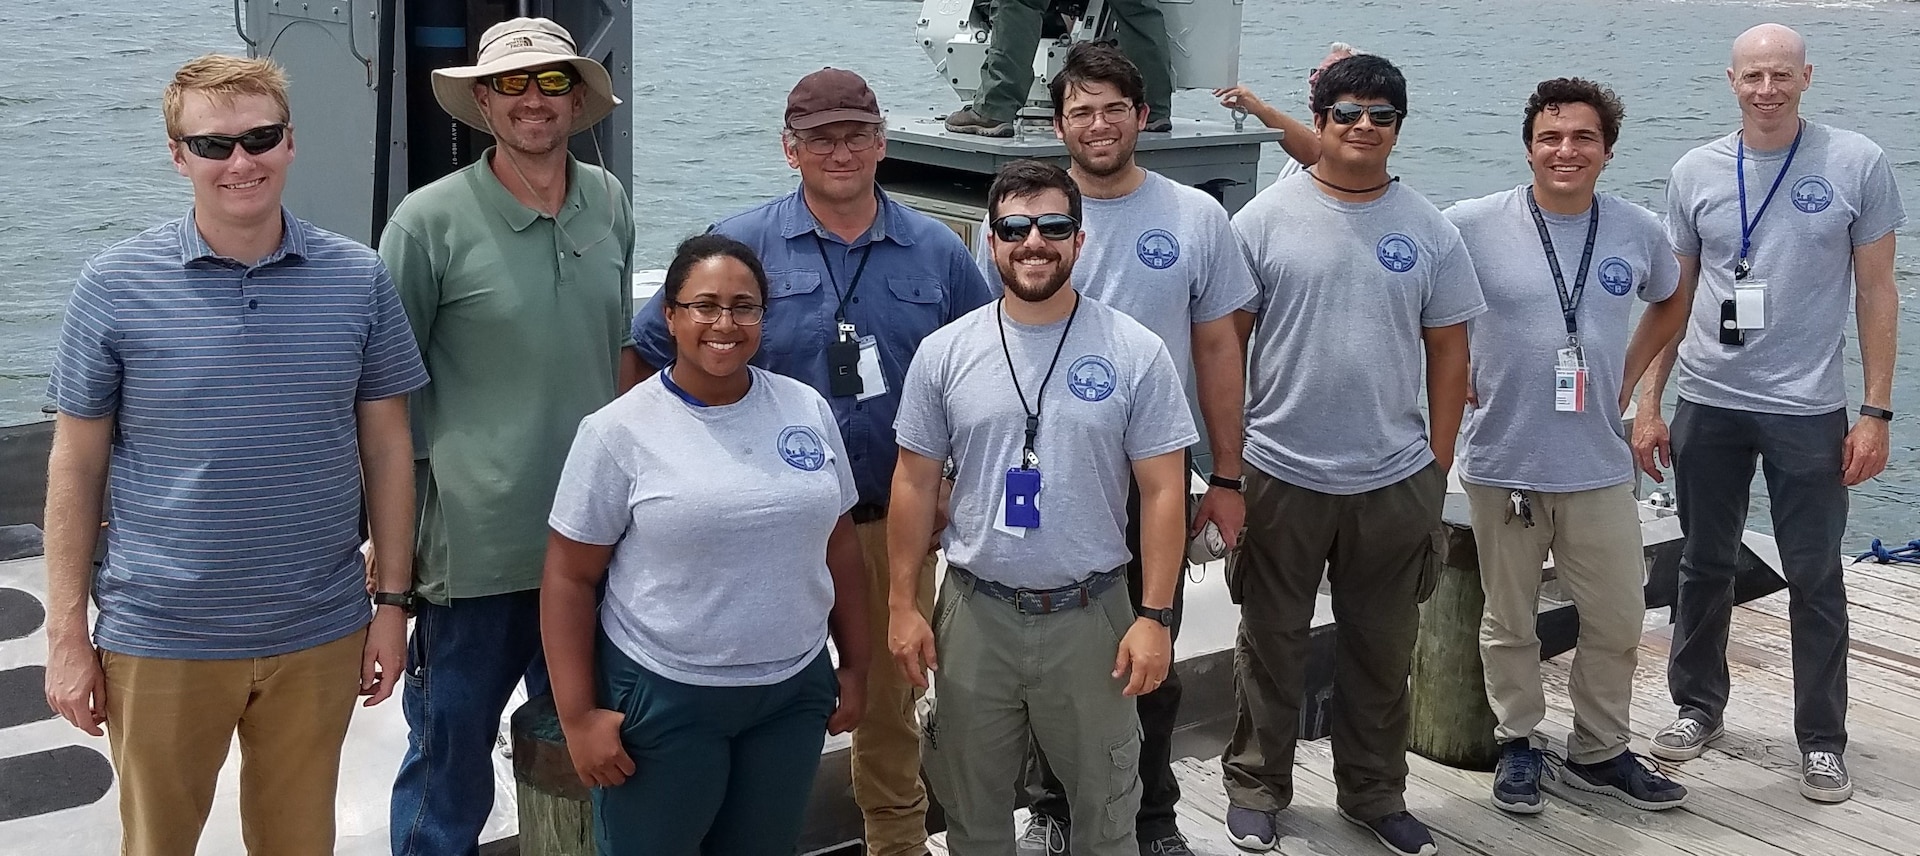 IMAGE: CAMP LEJEUNE, N.C. (July 19, 2019) — The Naval Surface Warfare Center Dahlgren Division (NSWCDD) Expeditionary Warfare Unmanned Surface Vessel (USV) team - pictured at the 2019 Advanced Naval Technology Exercise (ANTX) - demonstrated the Expeditionary Warfare USV’s ability to control inshore and littoral areas while identifying and engaging remote targets at the exercise. The 40-foot self-driving boat is integrated with a HellFire Longbow missile system and a .50 gun mounted on a remote weapon station along with radar, video, and infrared systems. ANTX 2019 is an event where academic, industry and Navy participants test new and emerging technologies. NSWCDD scientists and engineers standing left to right are: Colin Pritchard, Adam Broad, Logan Camacho, Robert Gripshover, Kevin Green, Michael Teresi, Mark Manzano, Joseph ‘Tripp’ Cannella, and Michael Liska.  (U.S. Navy photo/Released)